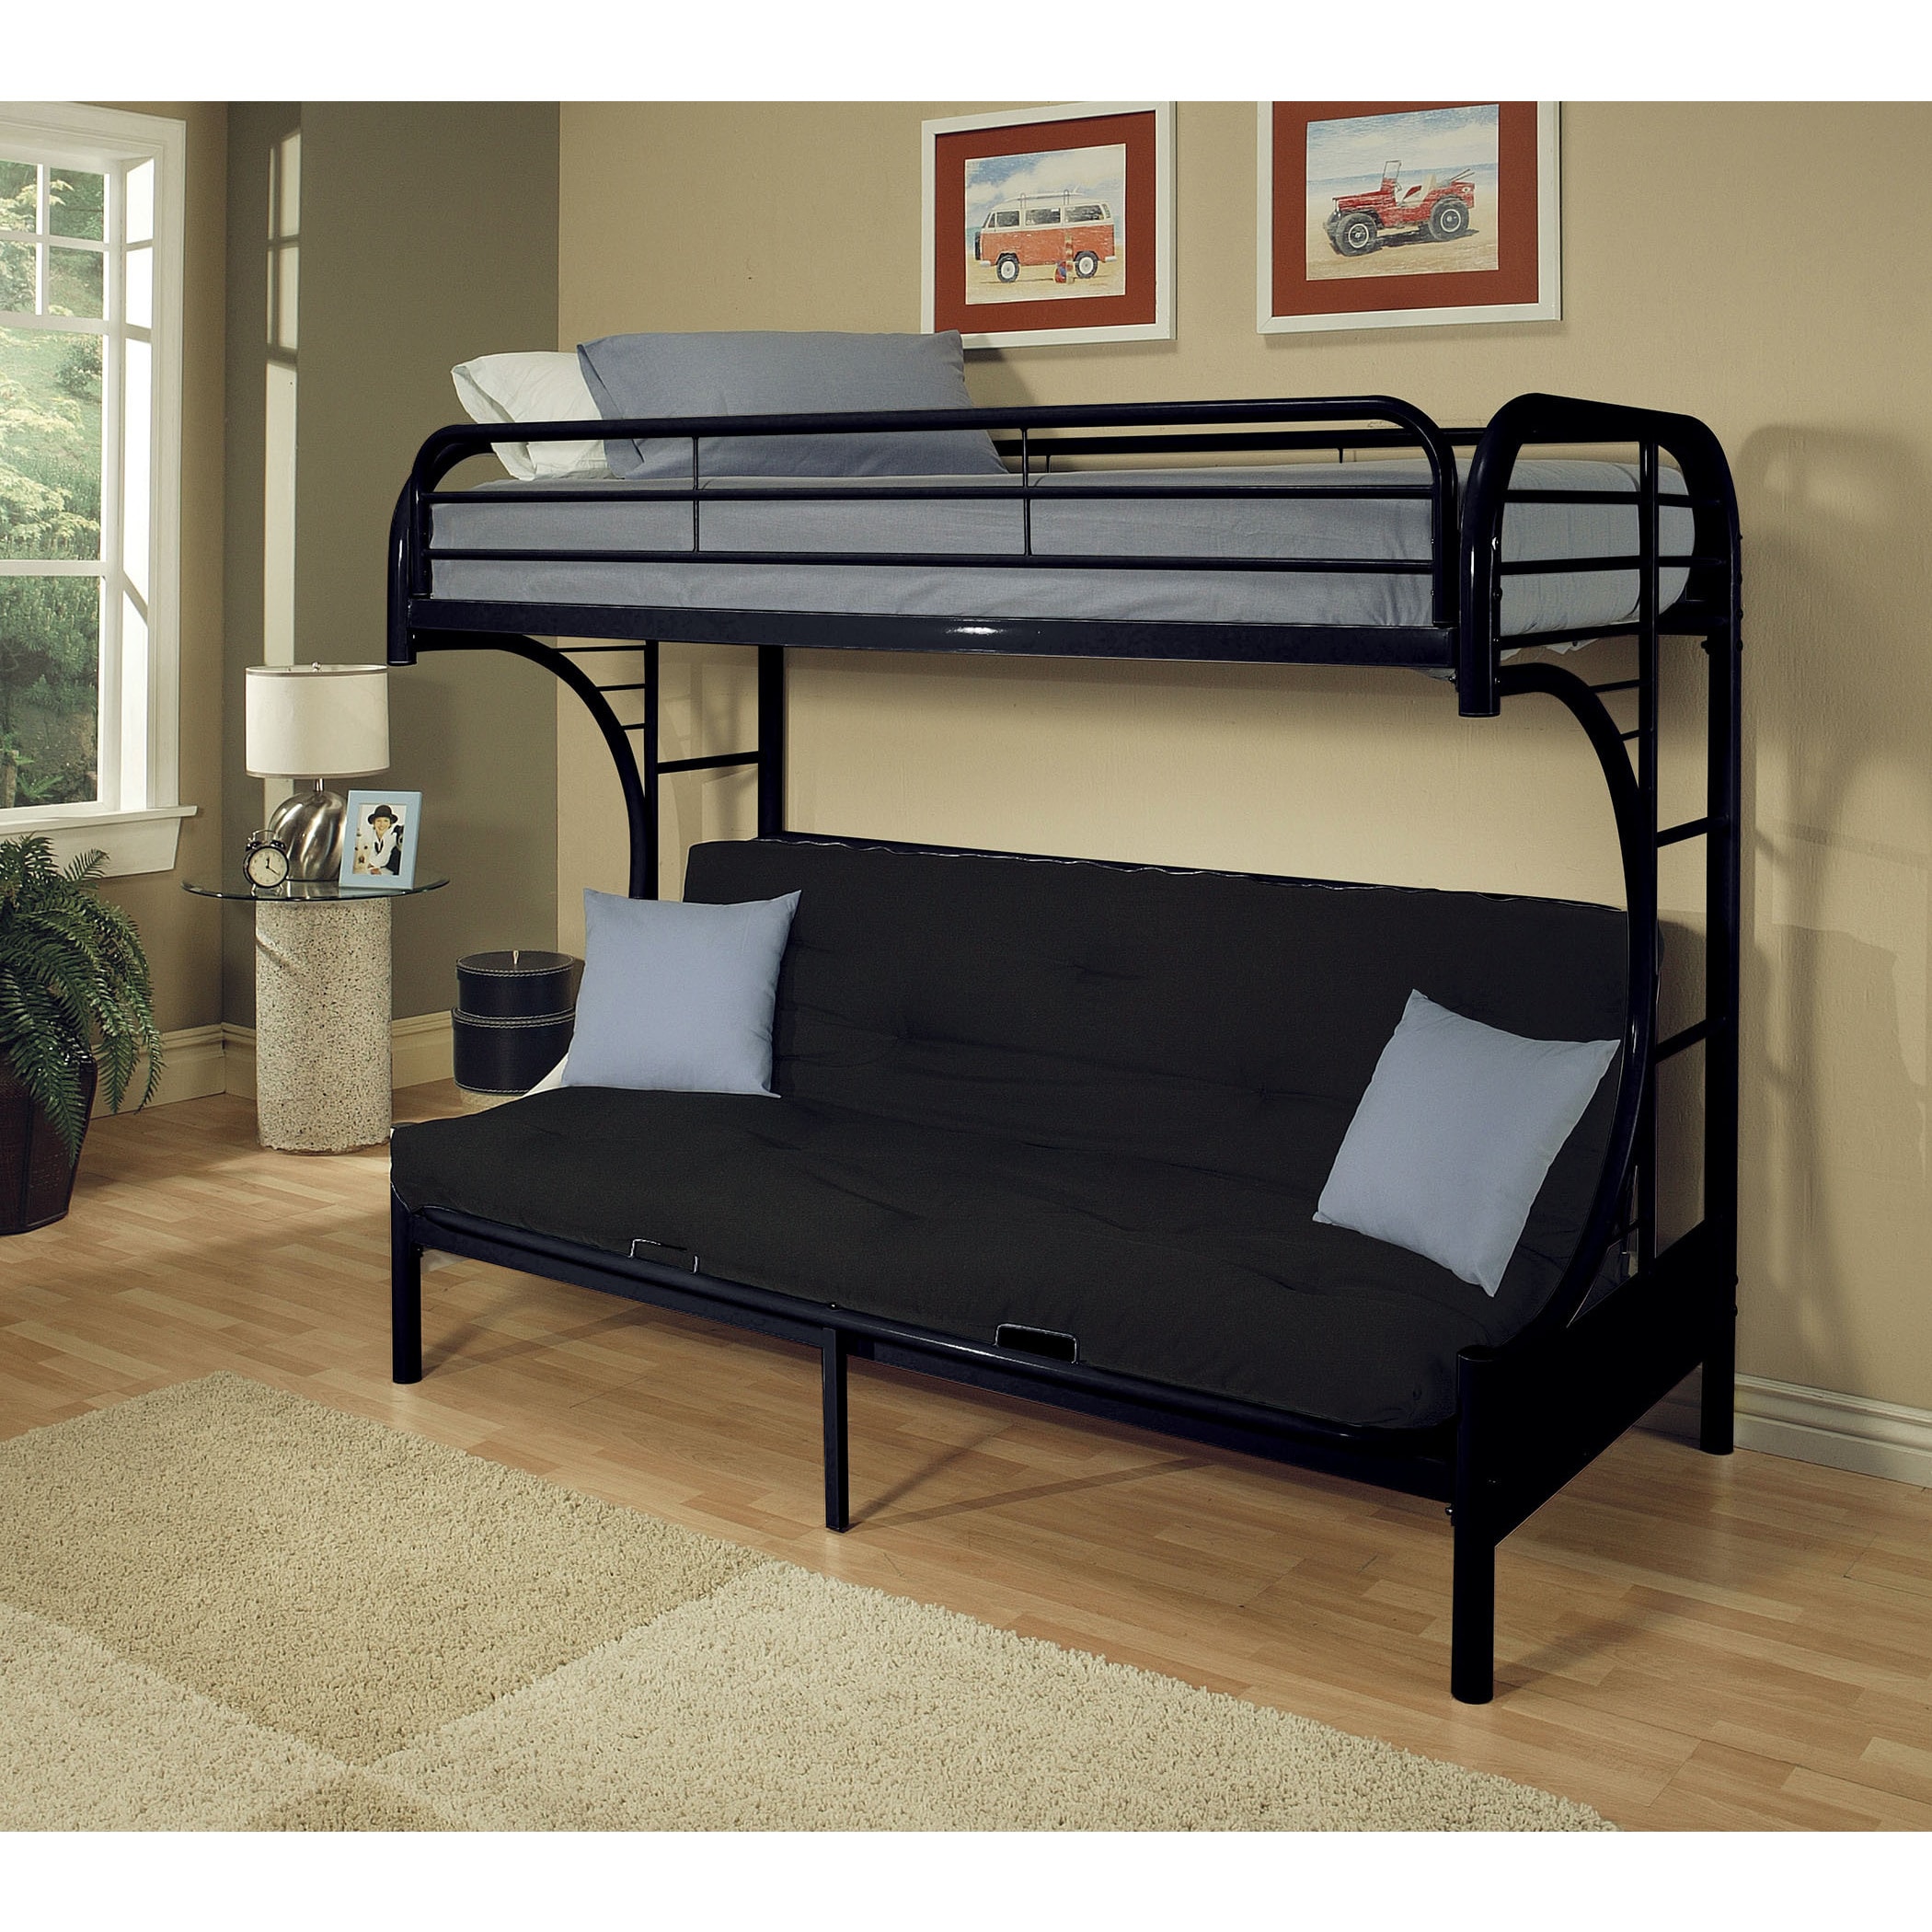 bunk bed with seating area